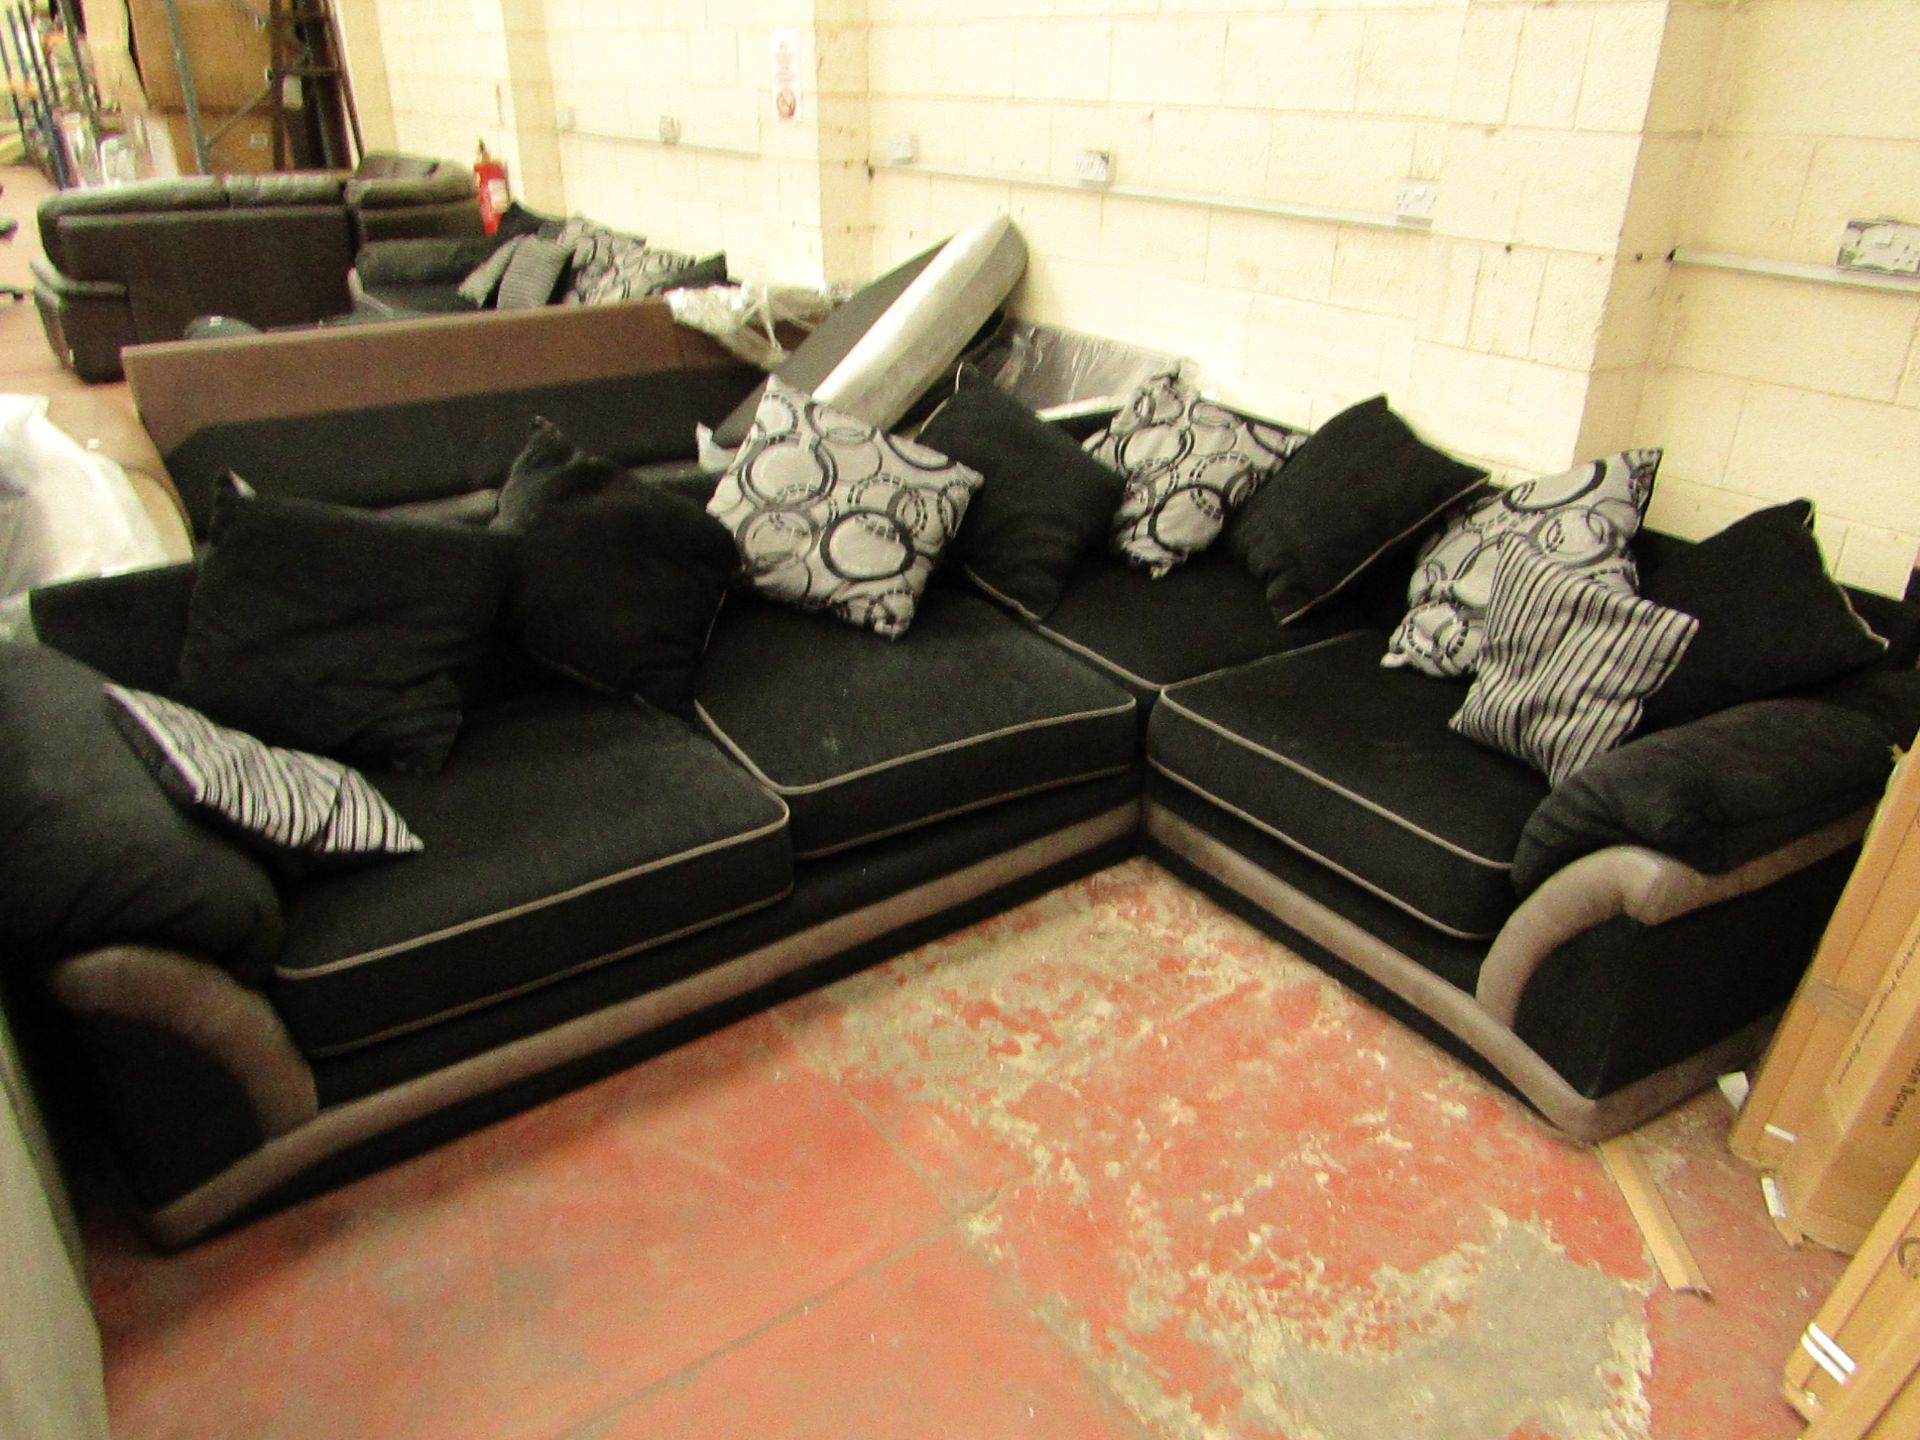 2 Piece 4 seater sofa with cushions , upon quick inspection no visual damage was found.